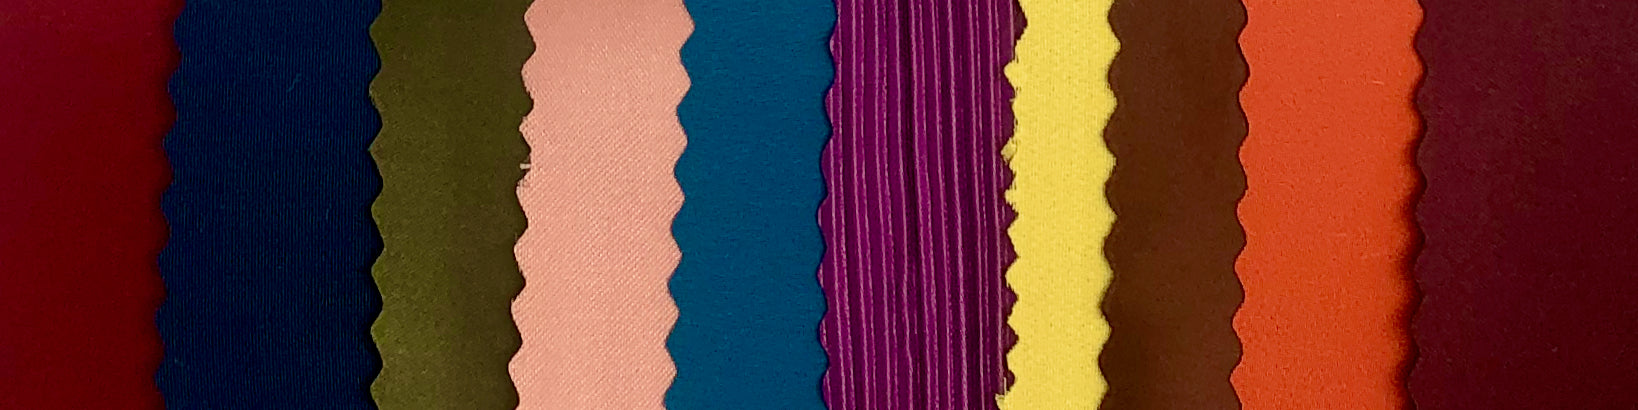 Introducing Fabric Colours Sets